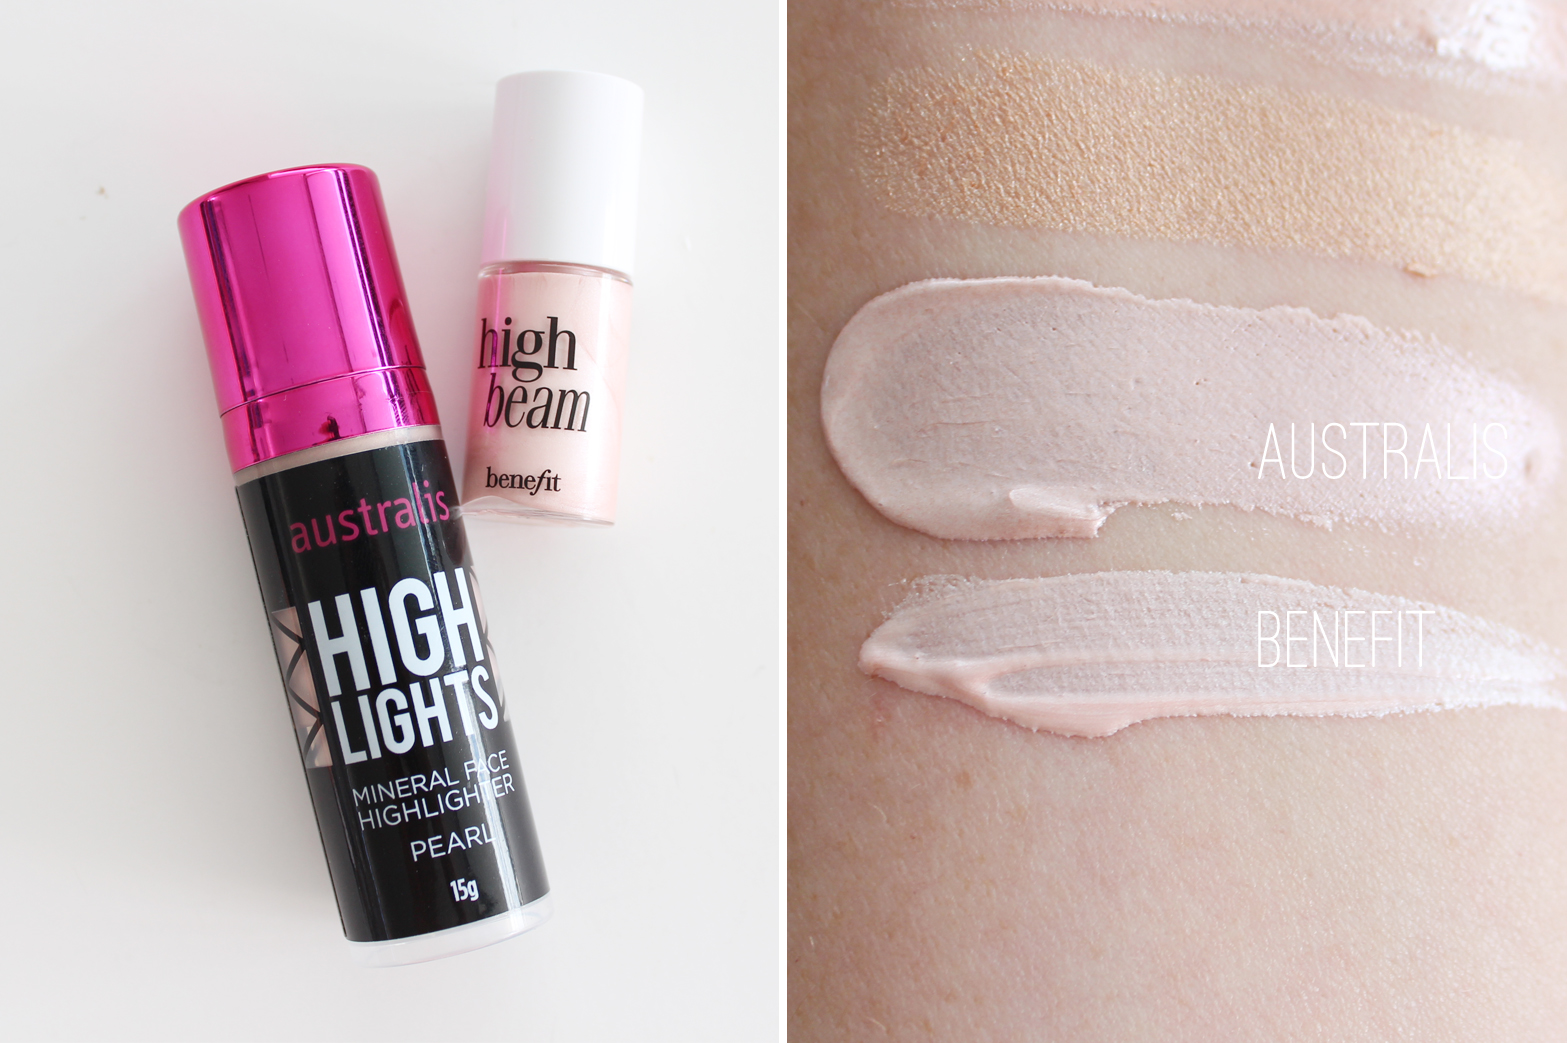 TOP FIVE | Highlighters [+ A Benefit Dupe] - Australis High Lights Mineral Face Highlighter in Pearl vs. Benefit High Beam - CassandraMyee